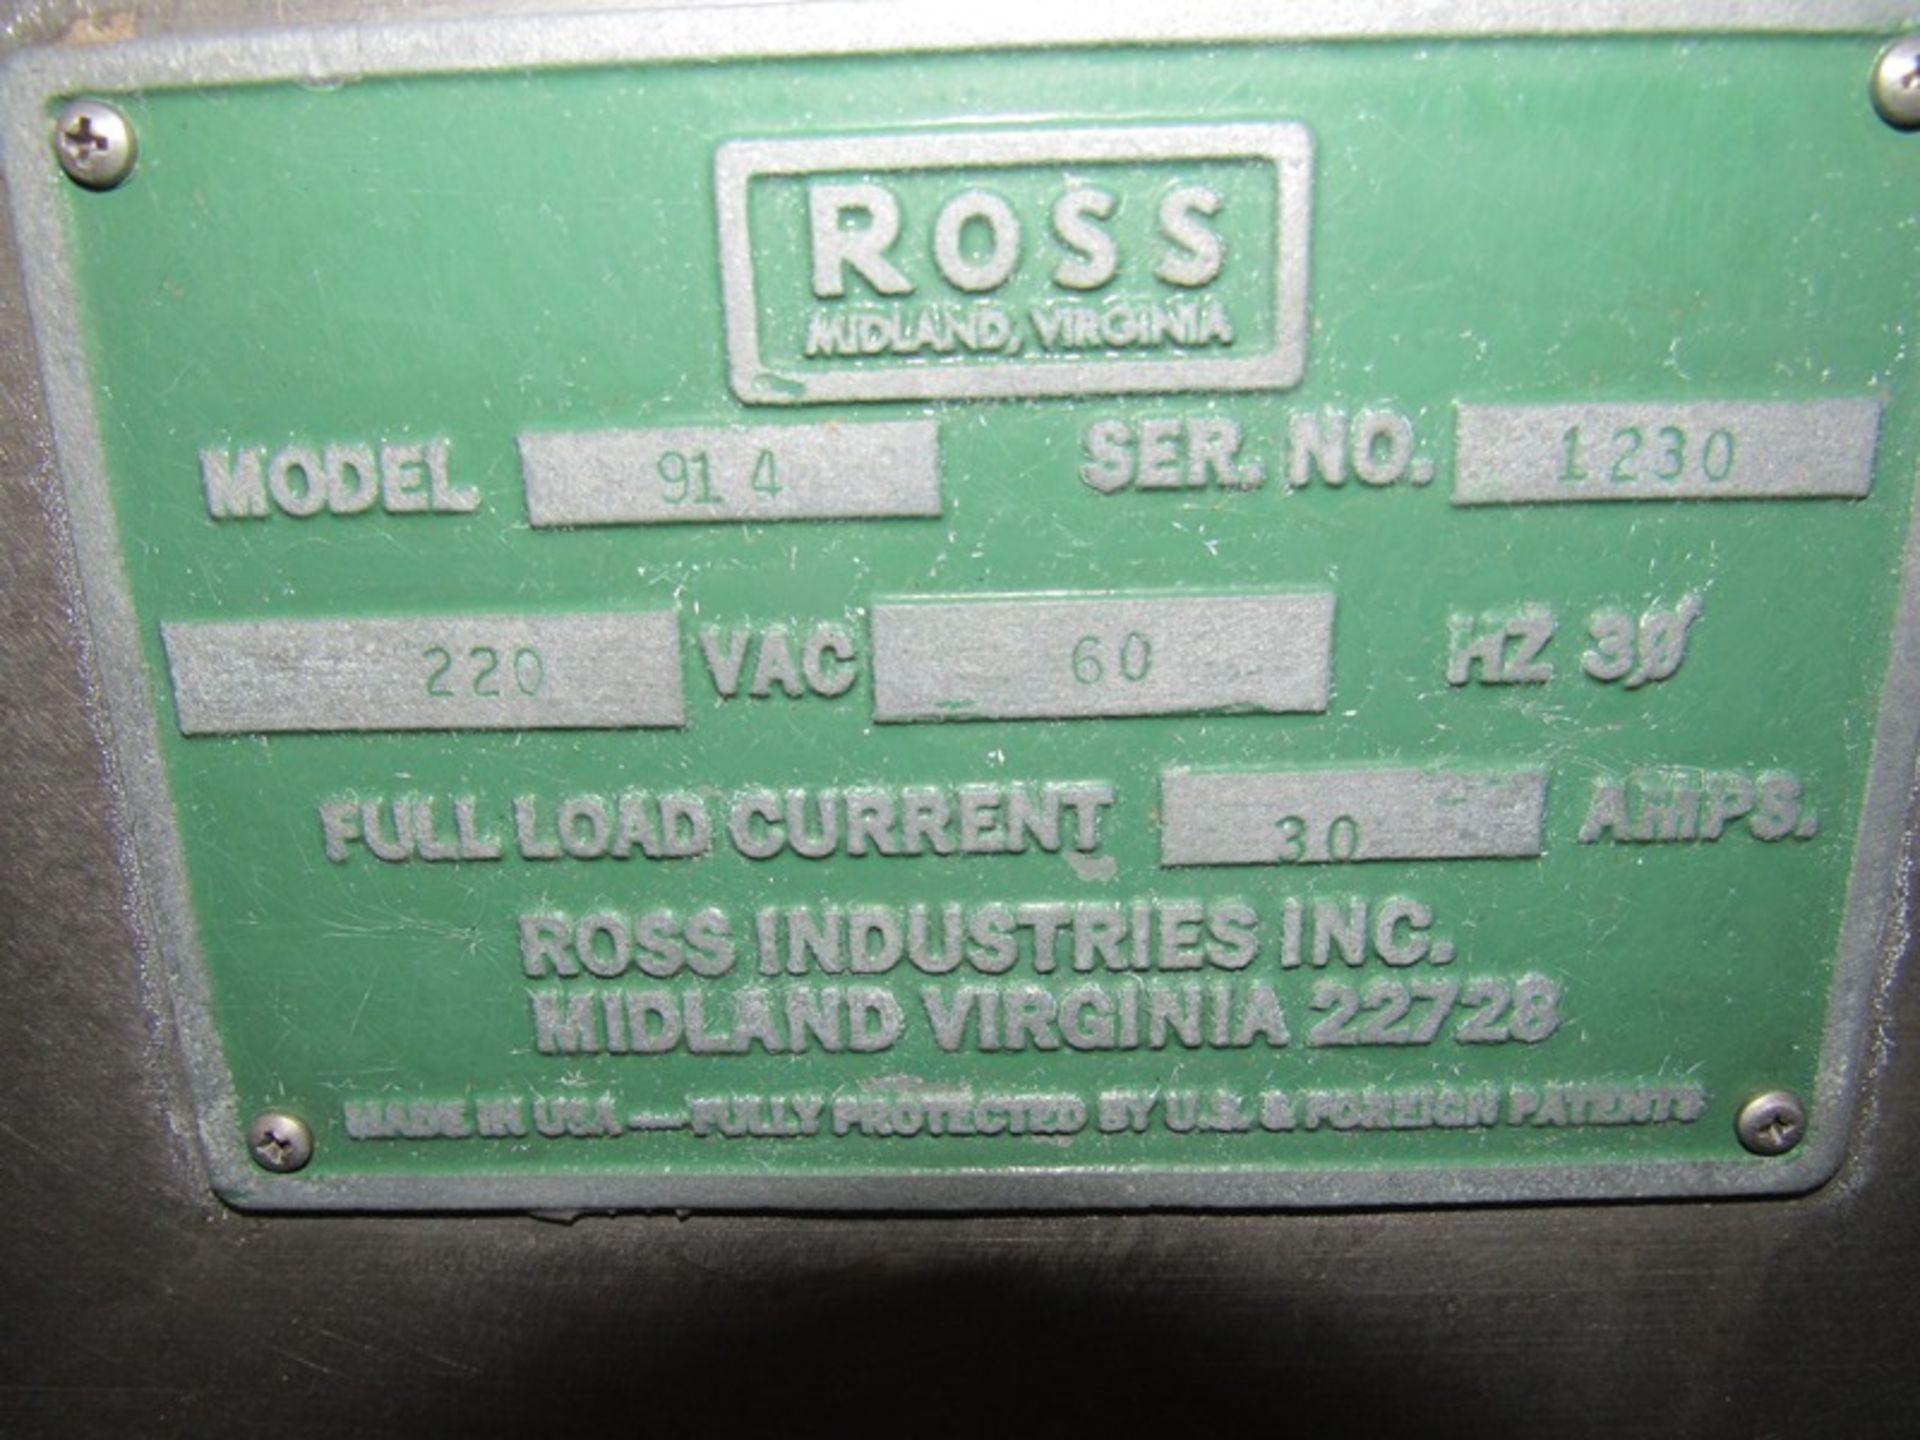 Ross Mdl. 914 Meat Press, Ser. #1230, 220 volts, 3 phase, no die (Located In Sandwich, IL ) - Image 9 of 9